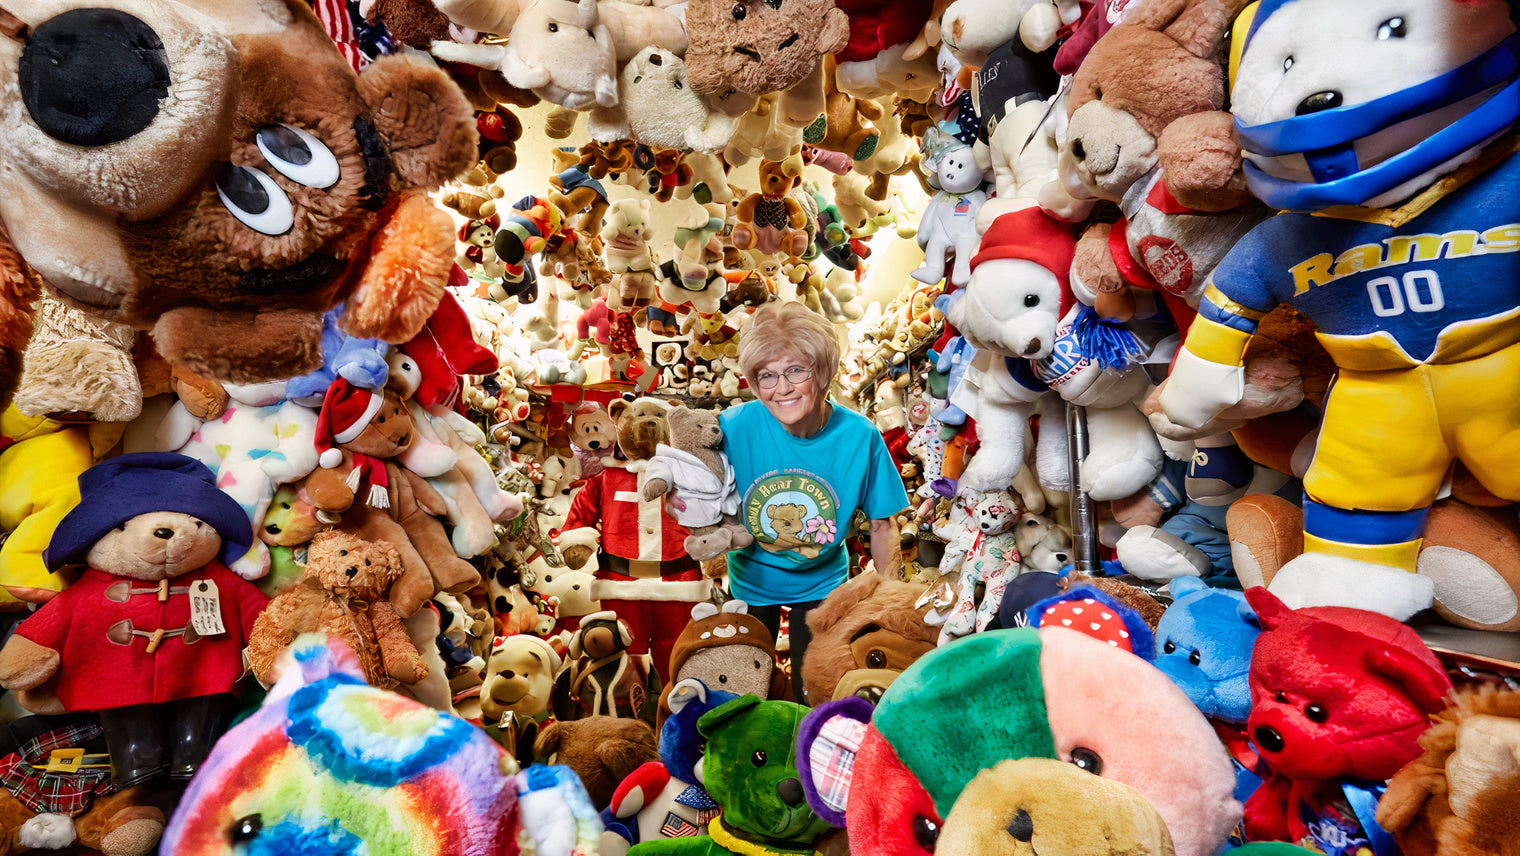 The World's Most Cherished Teddy Bear Collection: Jackie Miley's Story